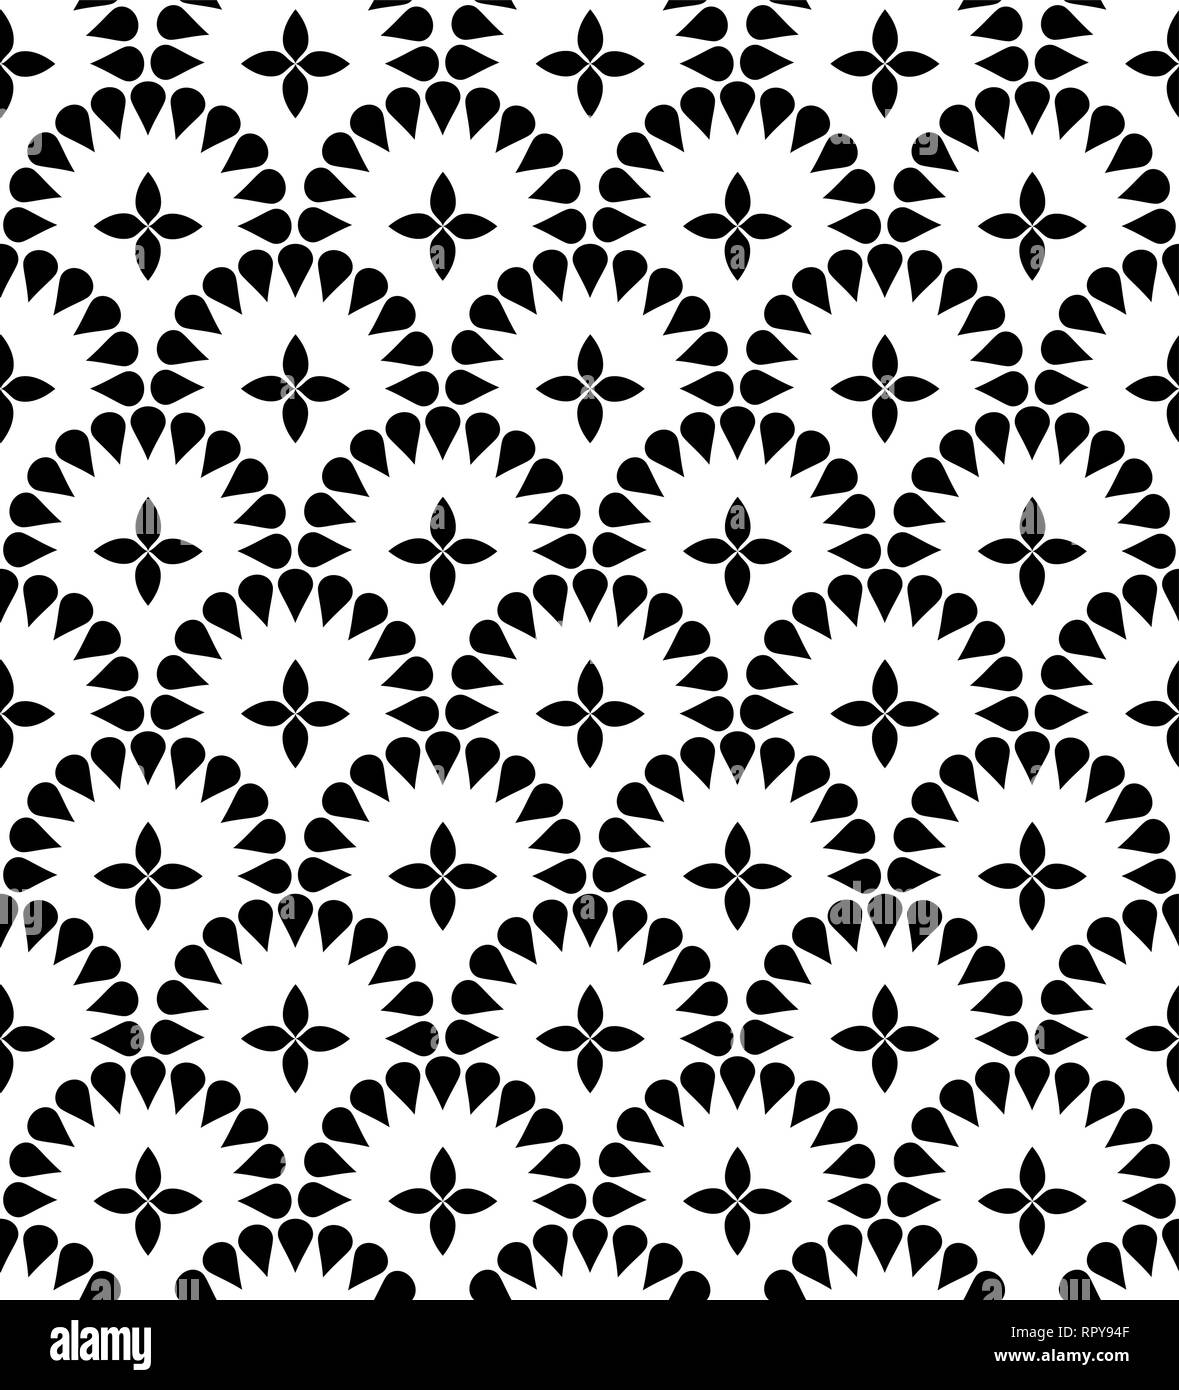 Japanese floral vector seamless repeating pattern. Stock Vector